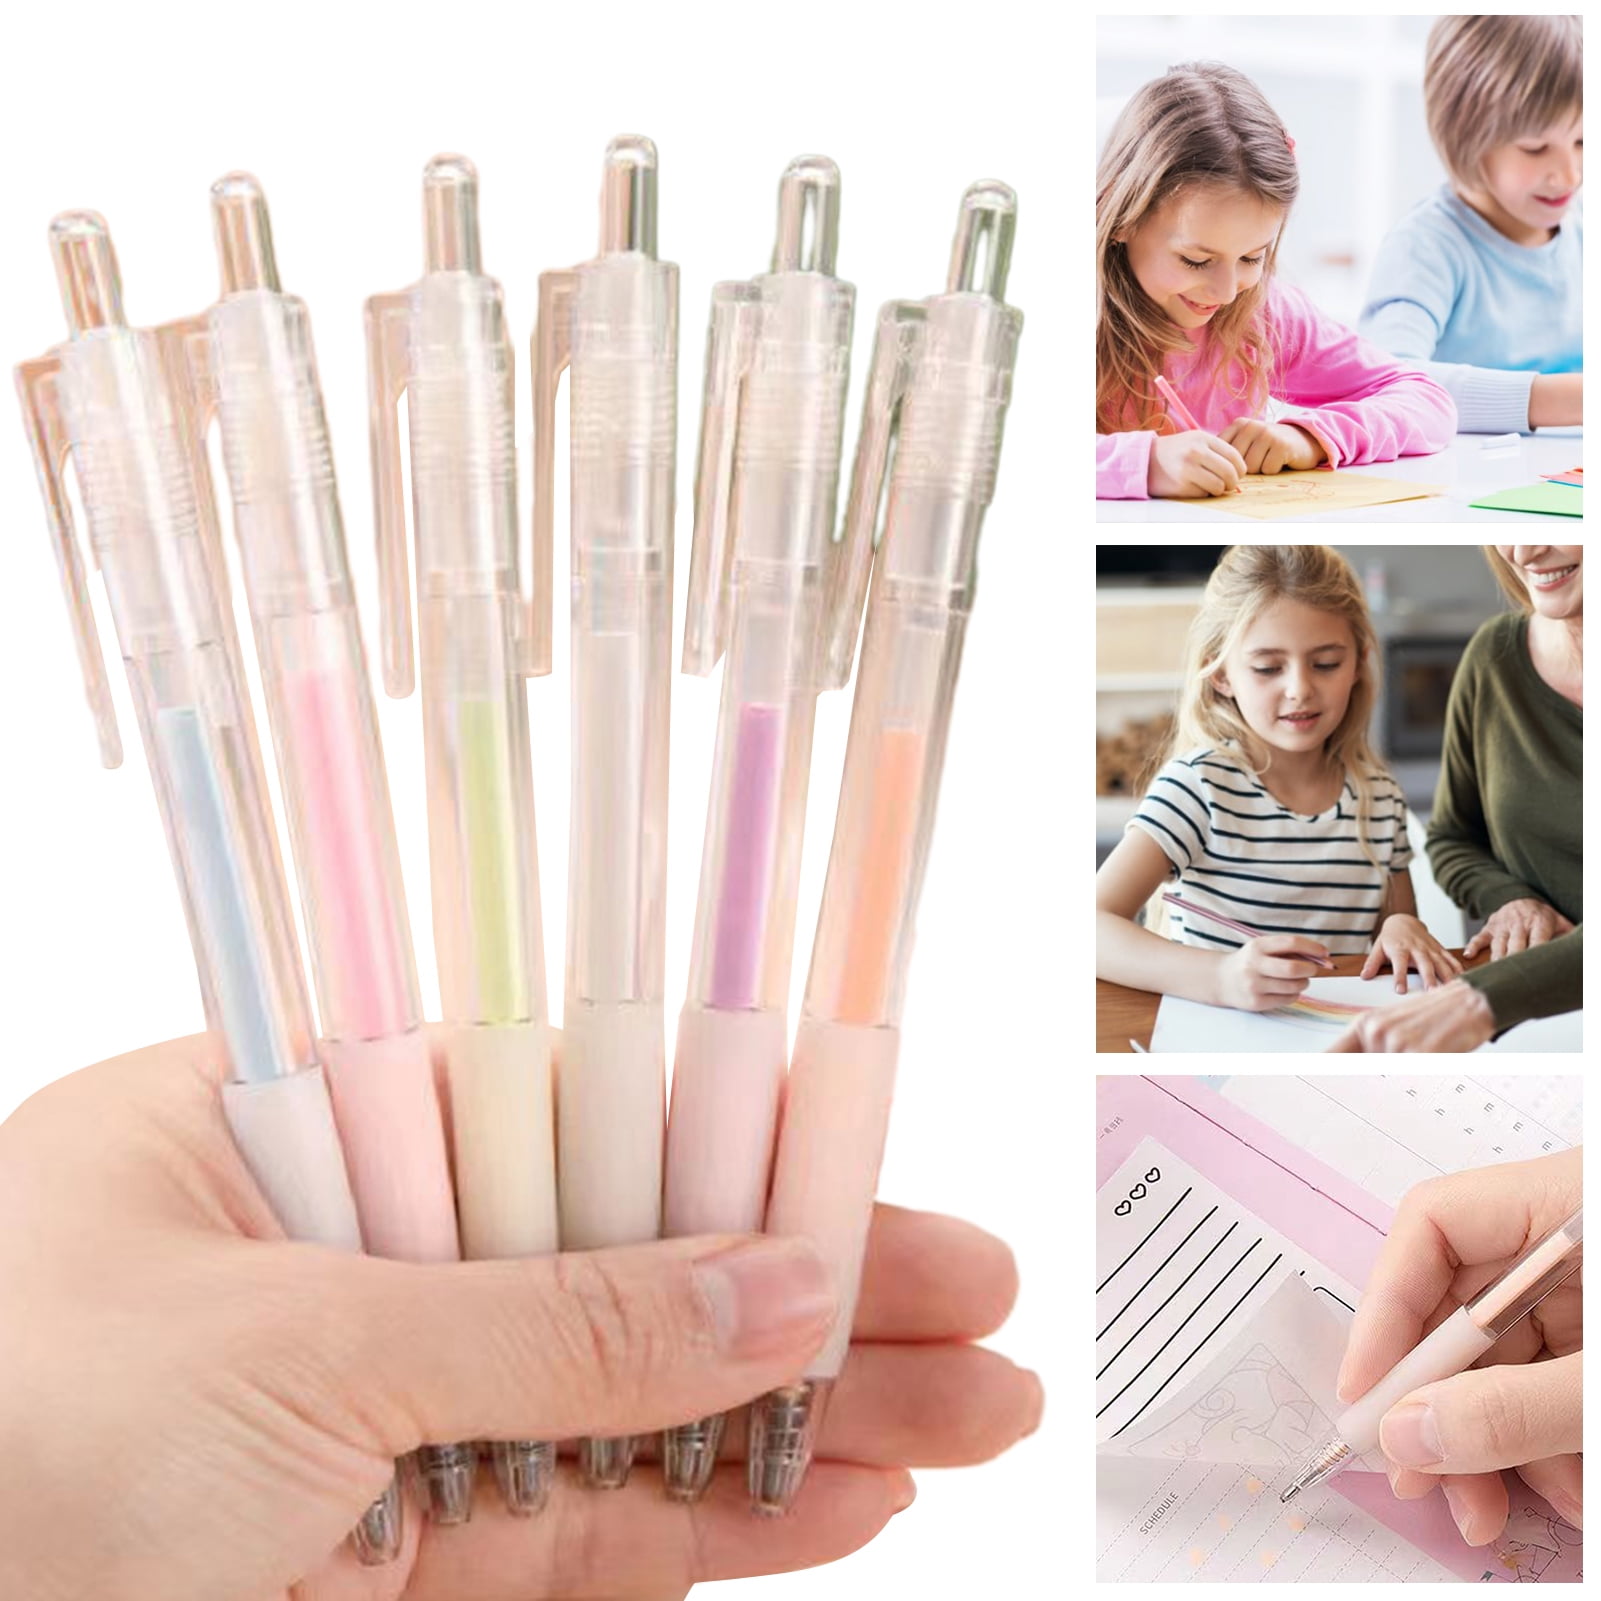  Lbaby Adhesive Glue Pens Quick-Drying Glue Pen High Viscosity  Solid Glue Sticks for Scrapbooking Art Projects DIY Handbook Card Making,  White : Arts, Crafts & Sewing